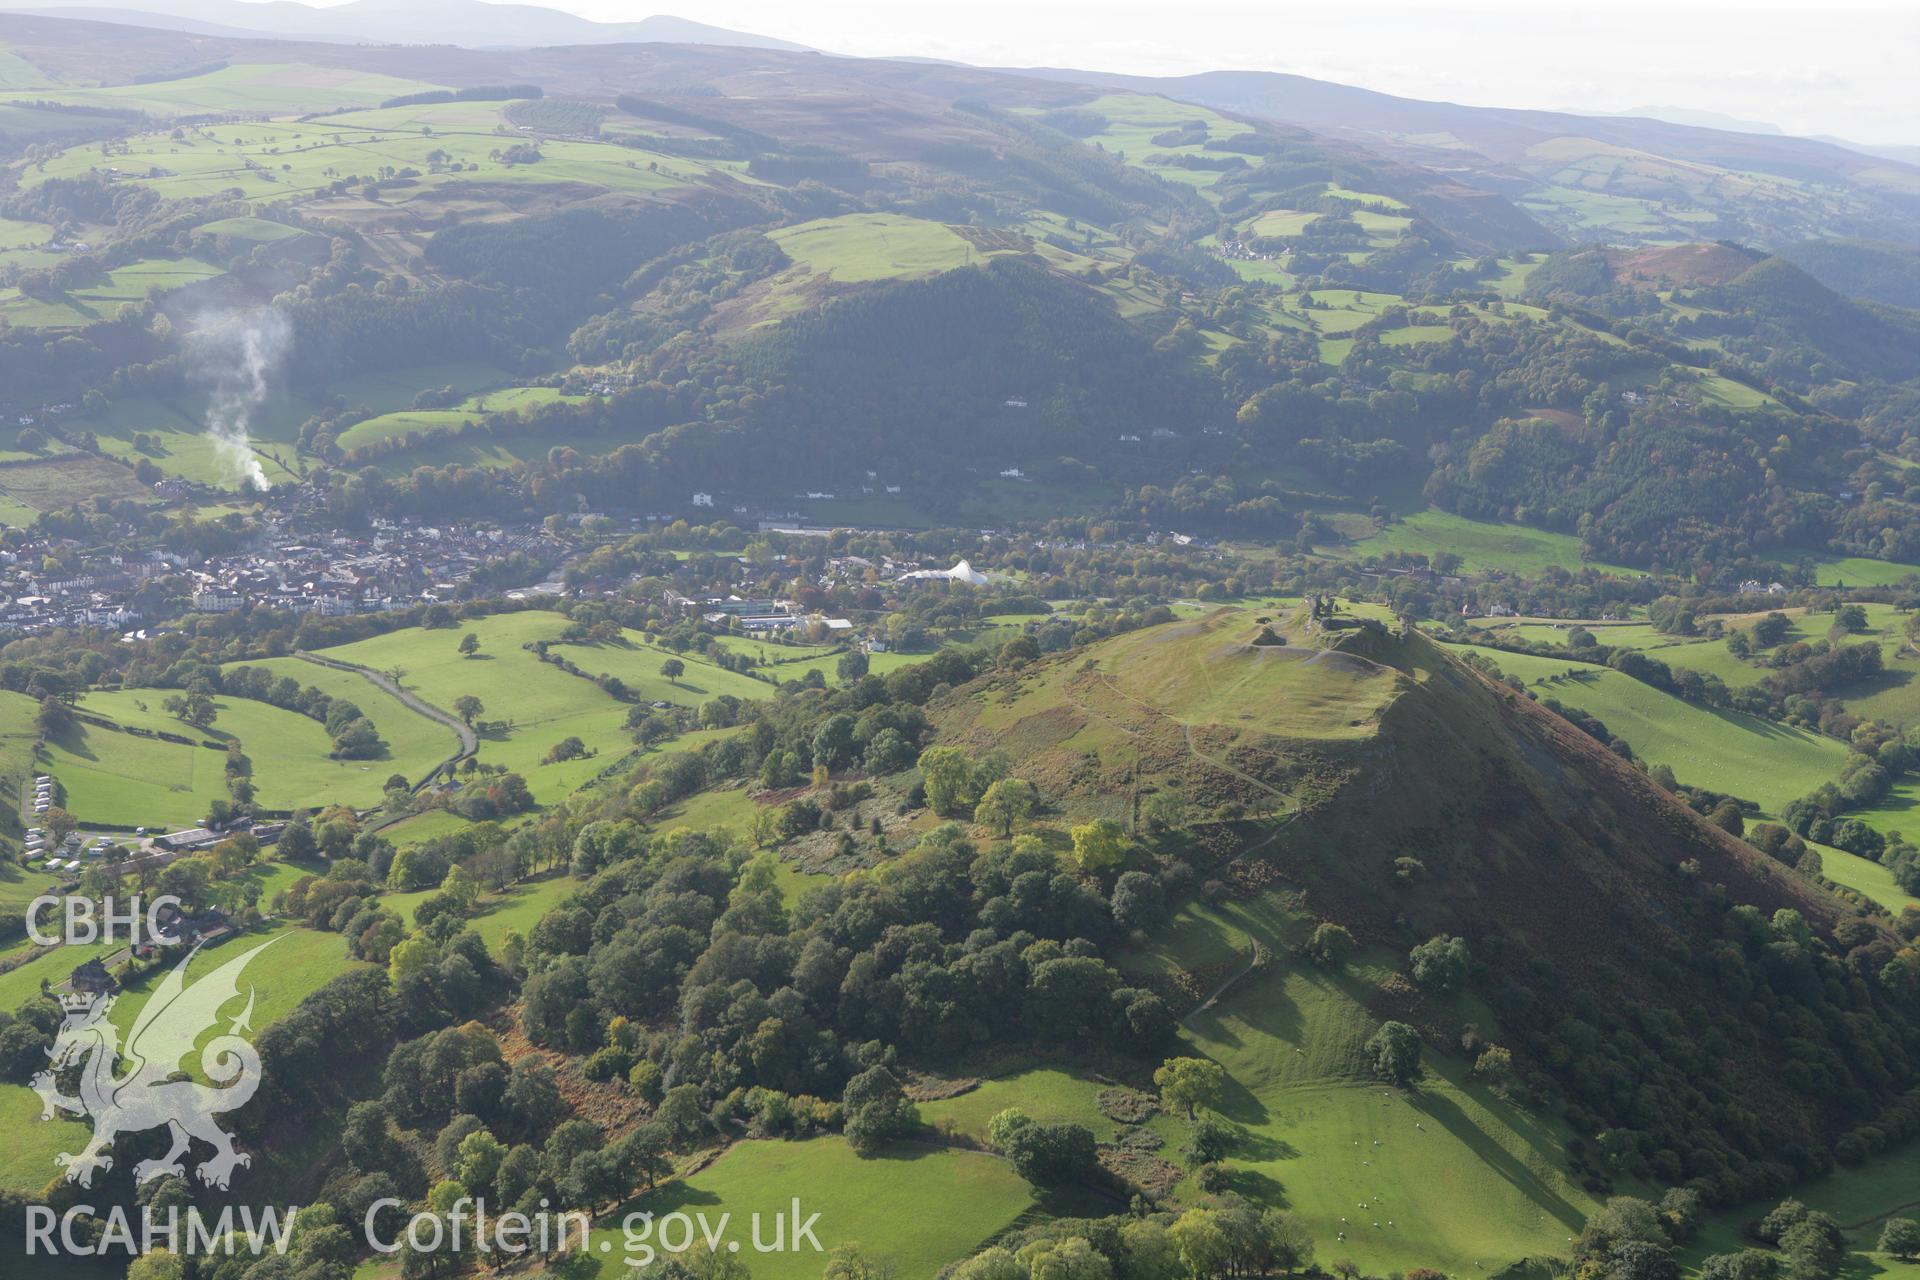 RCAHMW colour oblique aerial photograph of Castell Dinas Bran. Taken on 13 October 2009 by Toby Driver